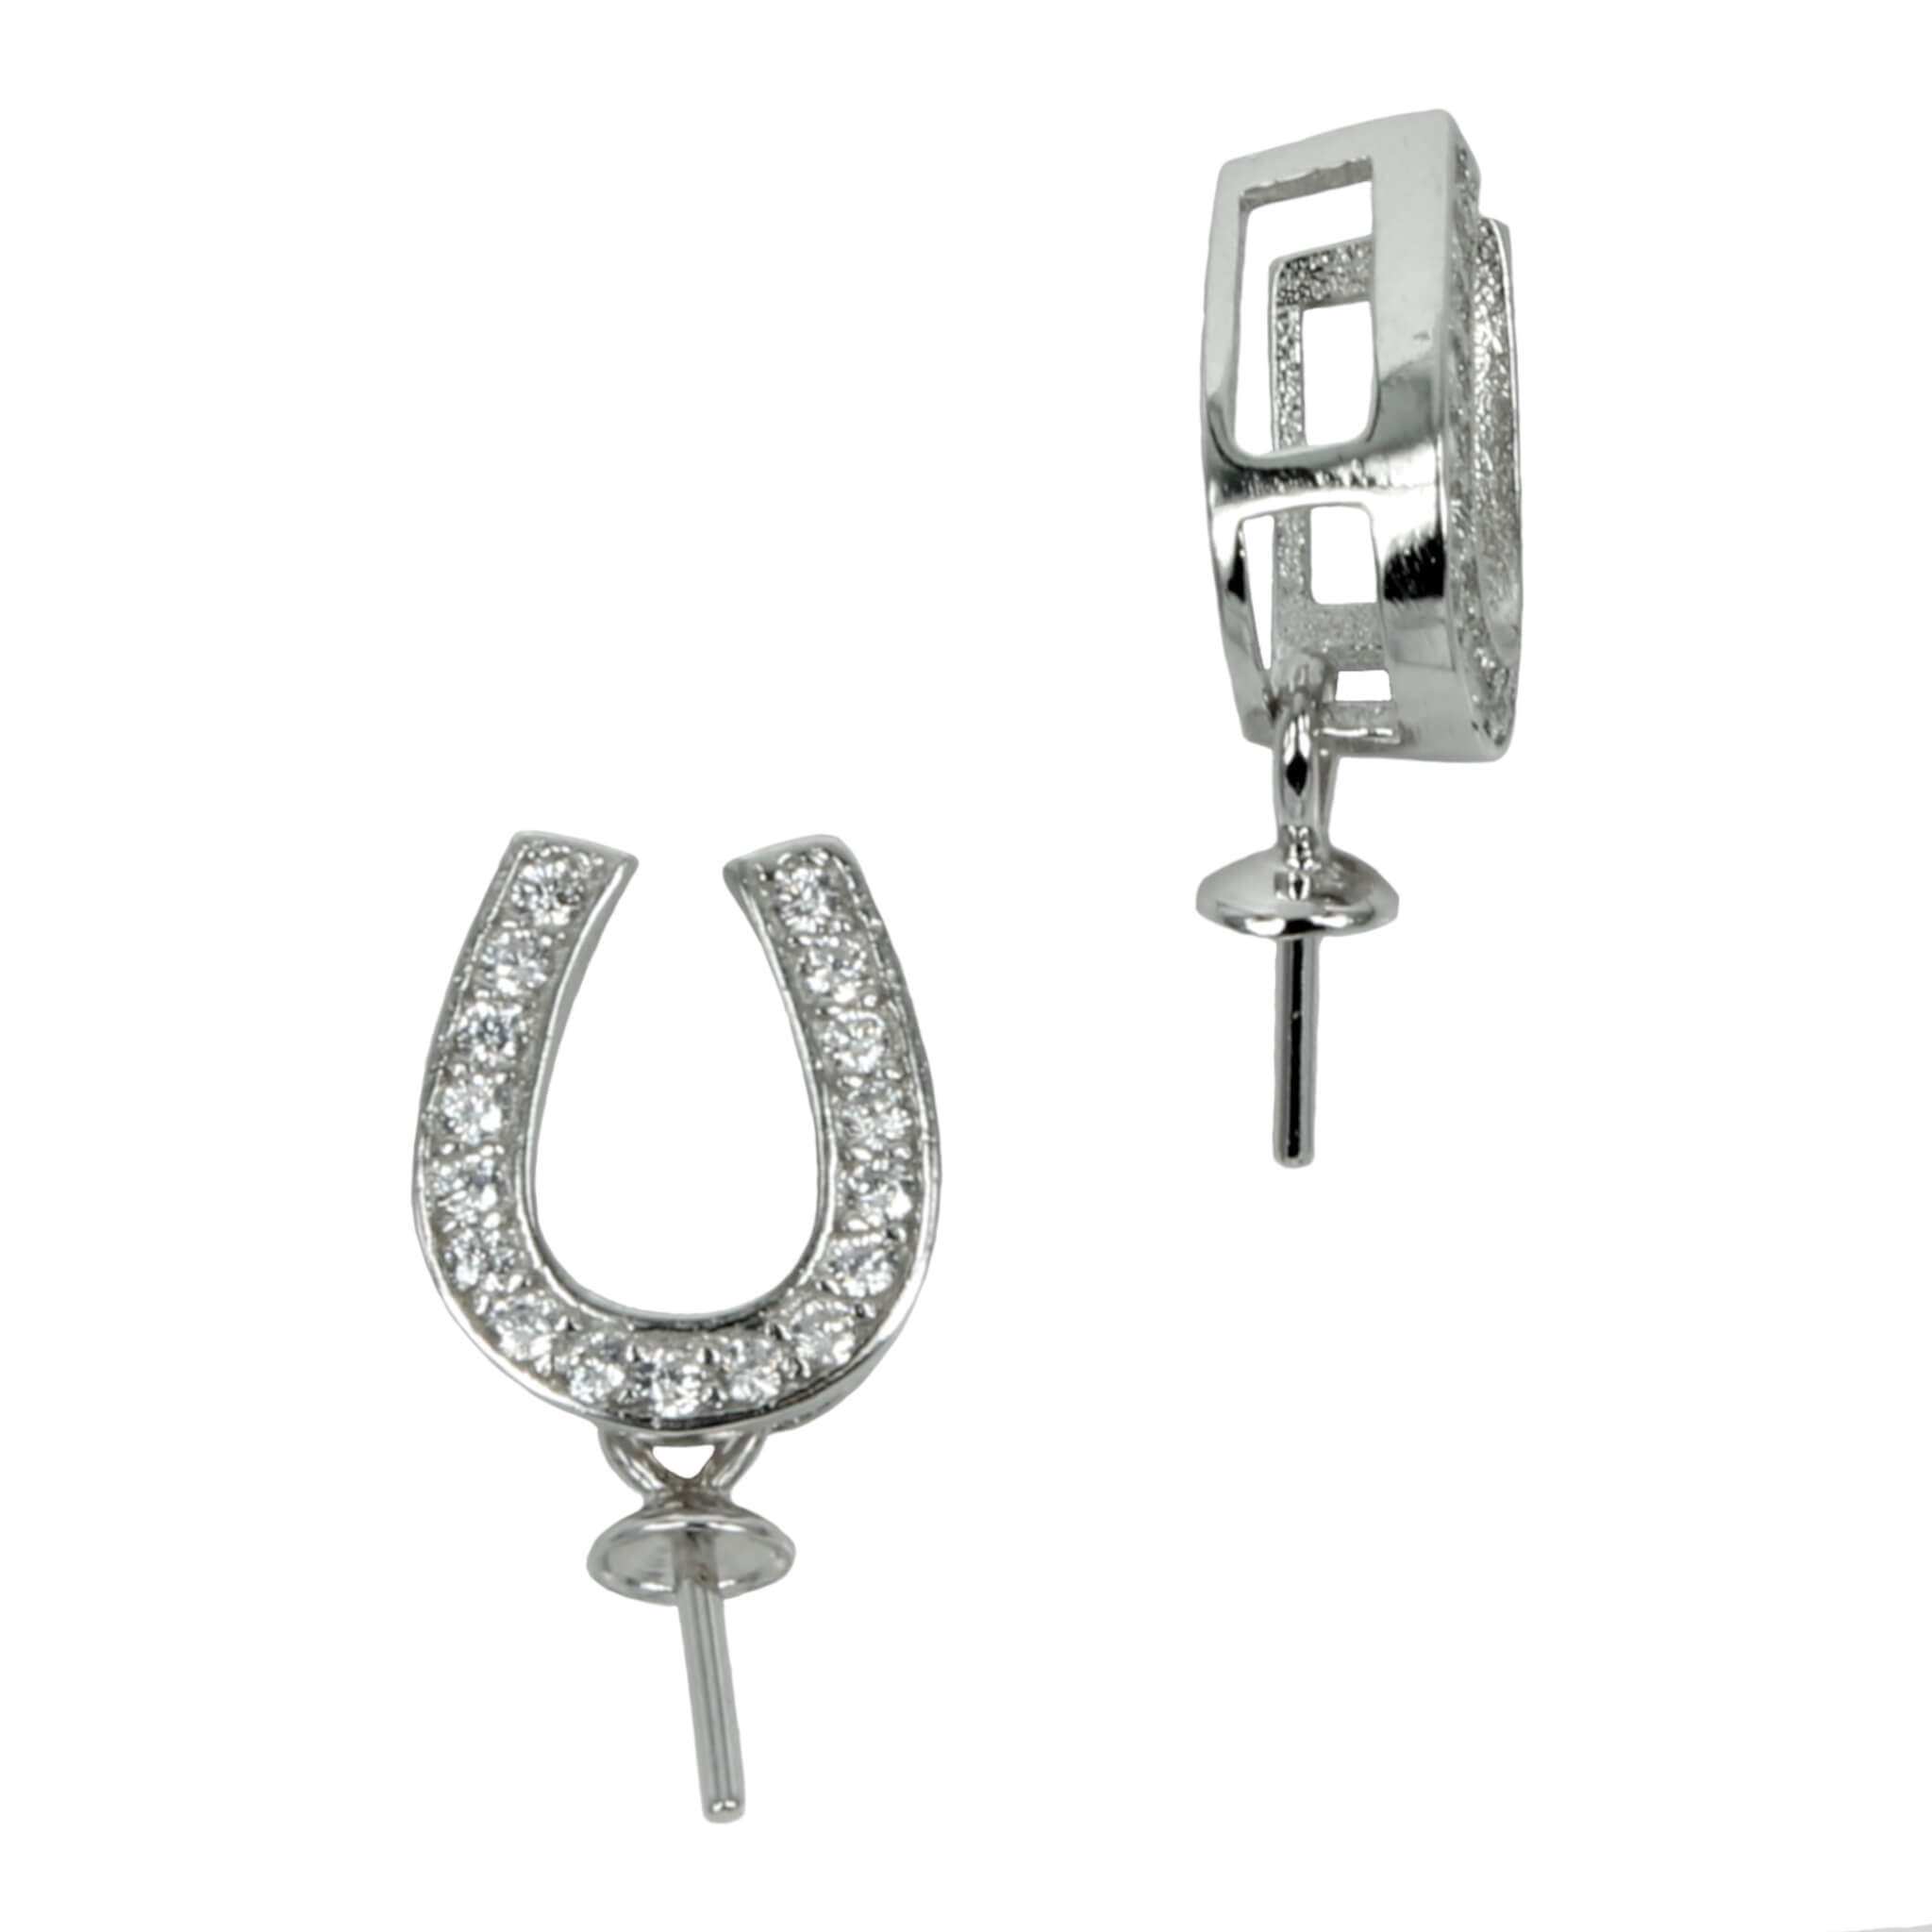 Horseshoe Cup & Peg Bail with CZ in Sterling Silver 12x8mm